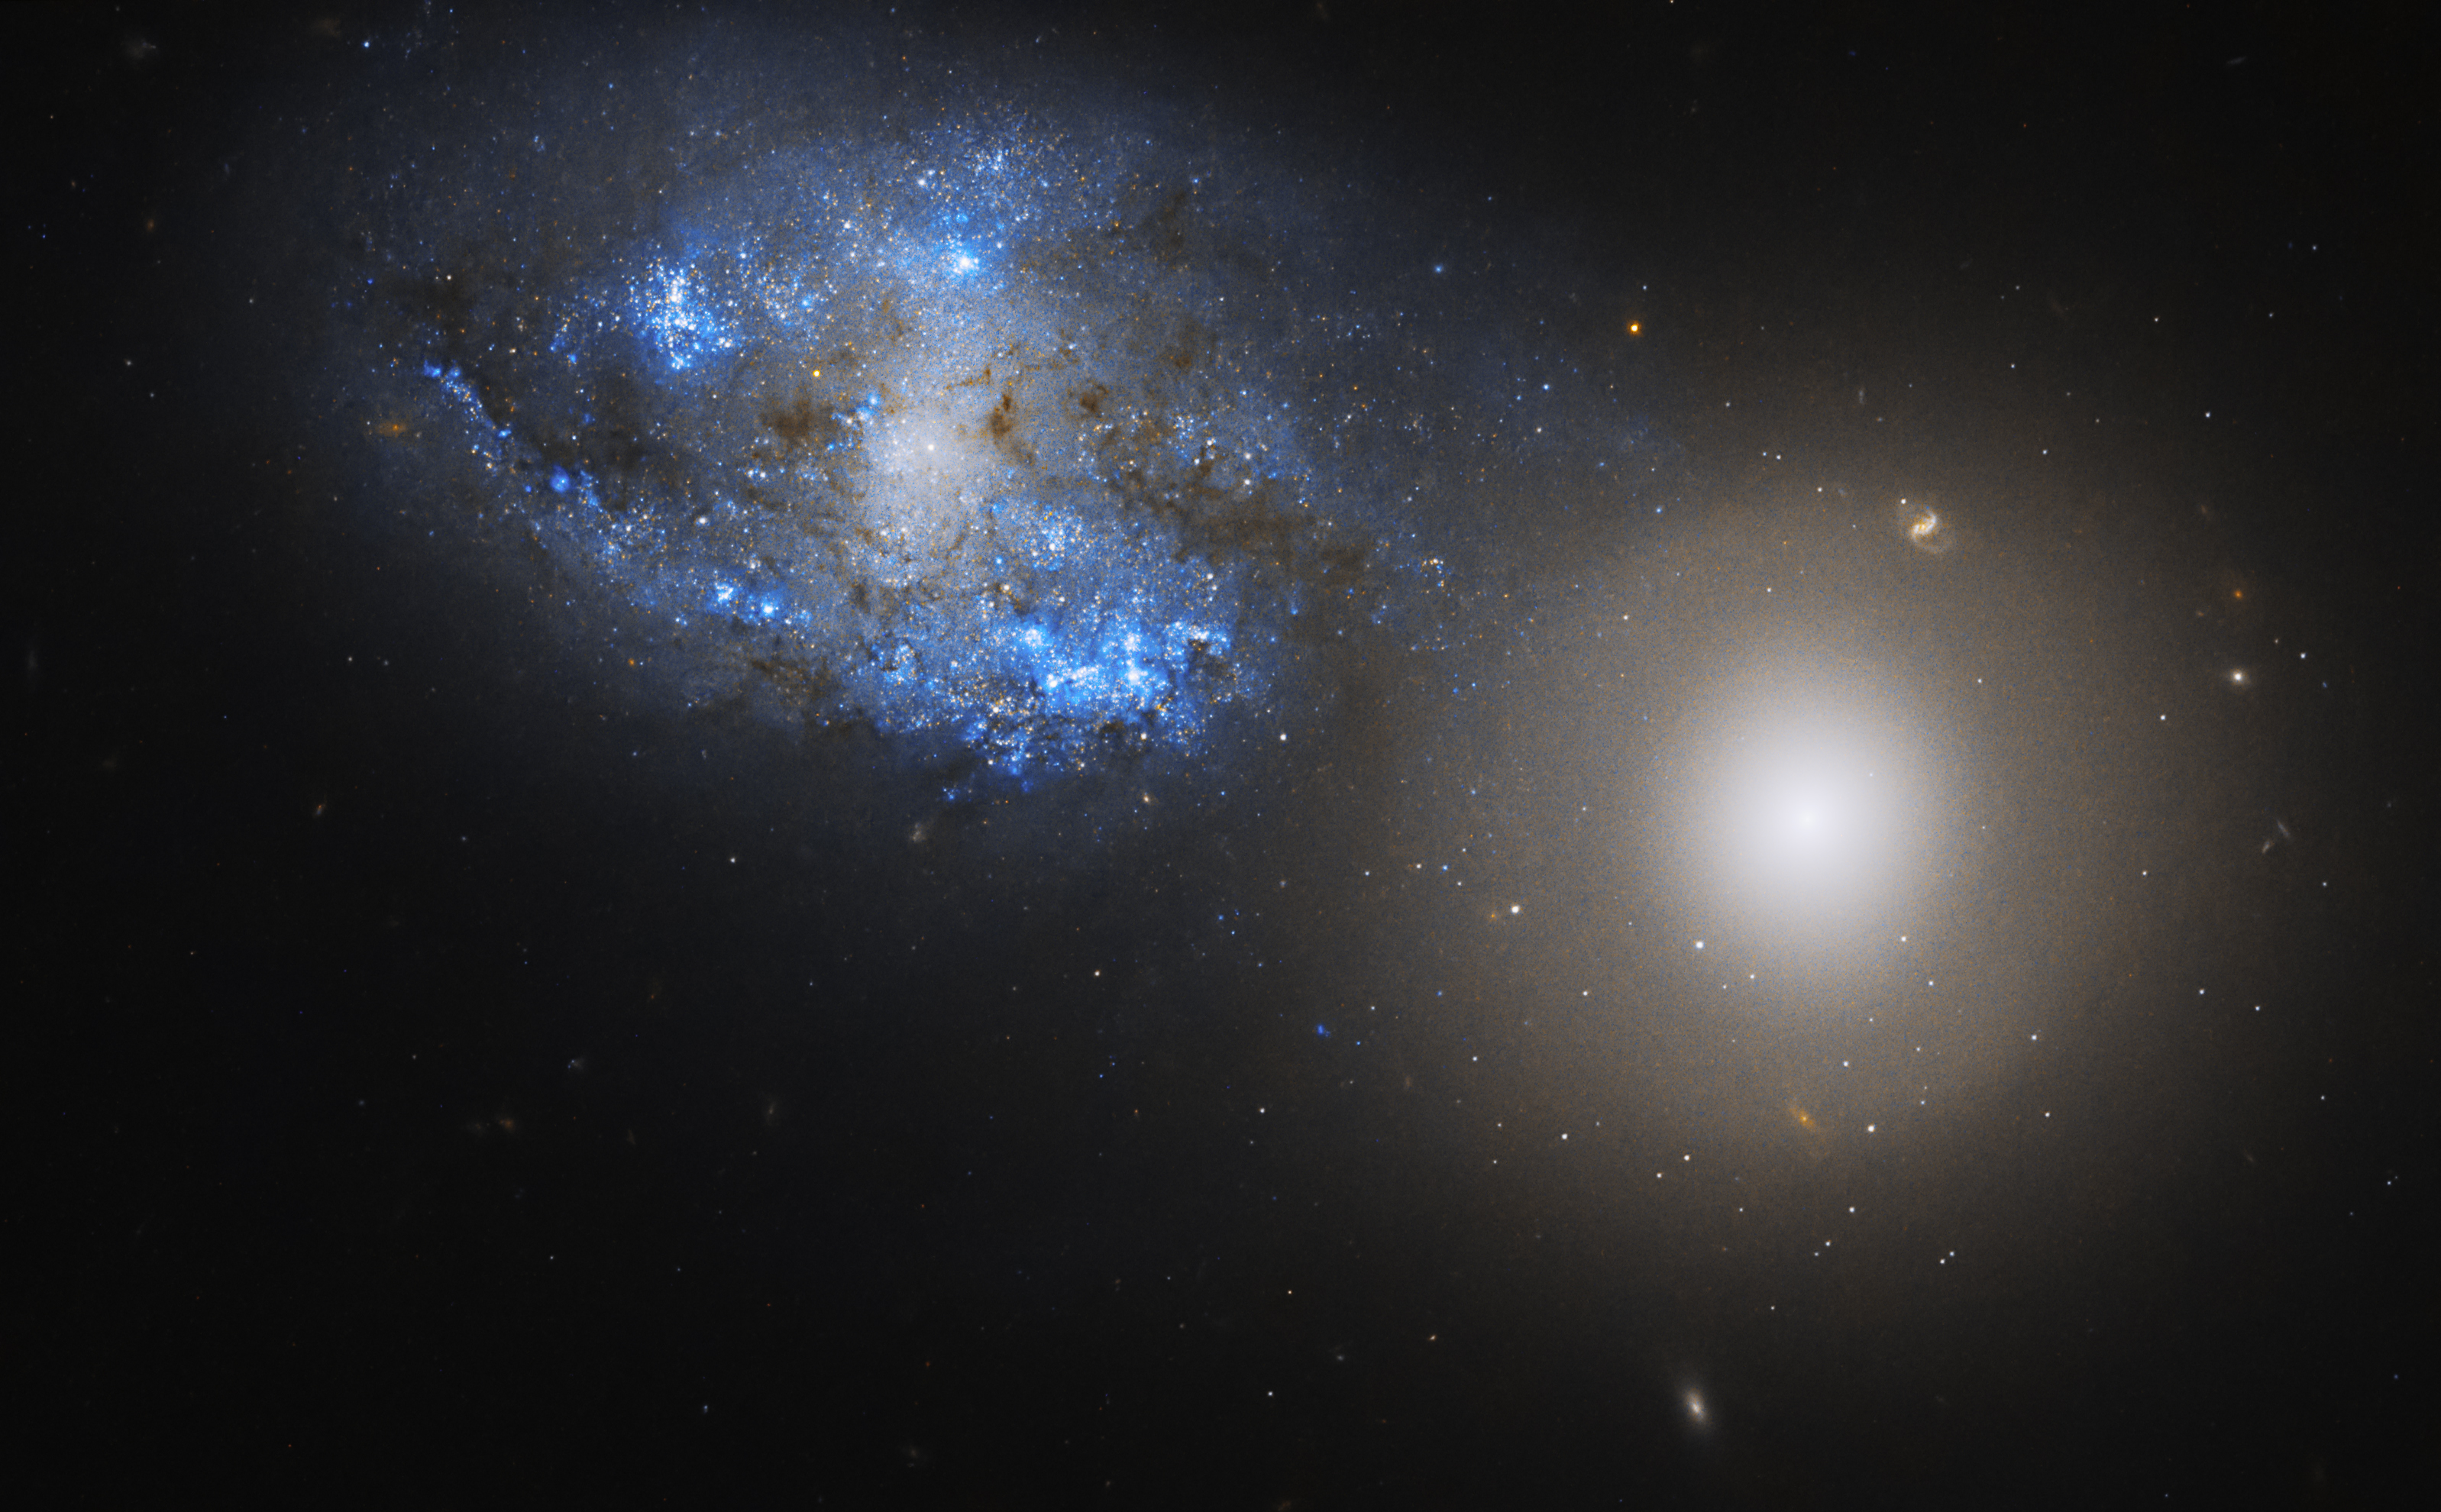 Two side-by-side galaxies fill the image. The leftmost galaxy is a bright spiral galaxy bursting with blue stars. The rightmost is a lenticular galaxy, emitting a hazy glow. Distant stars and galaxies dot the background.